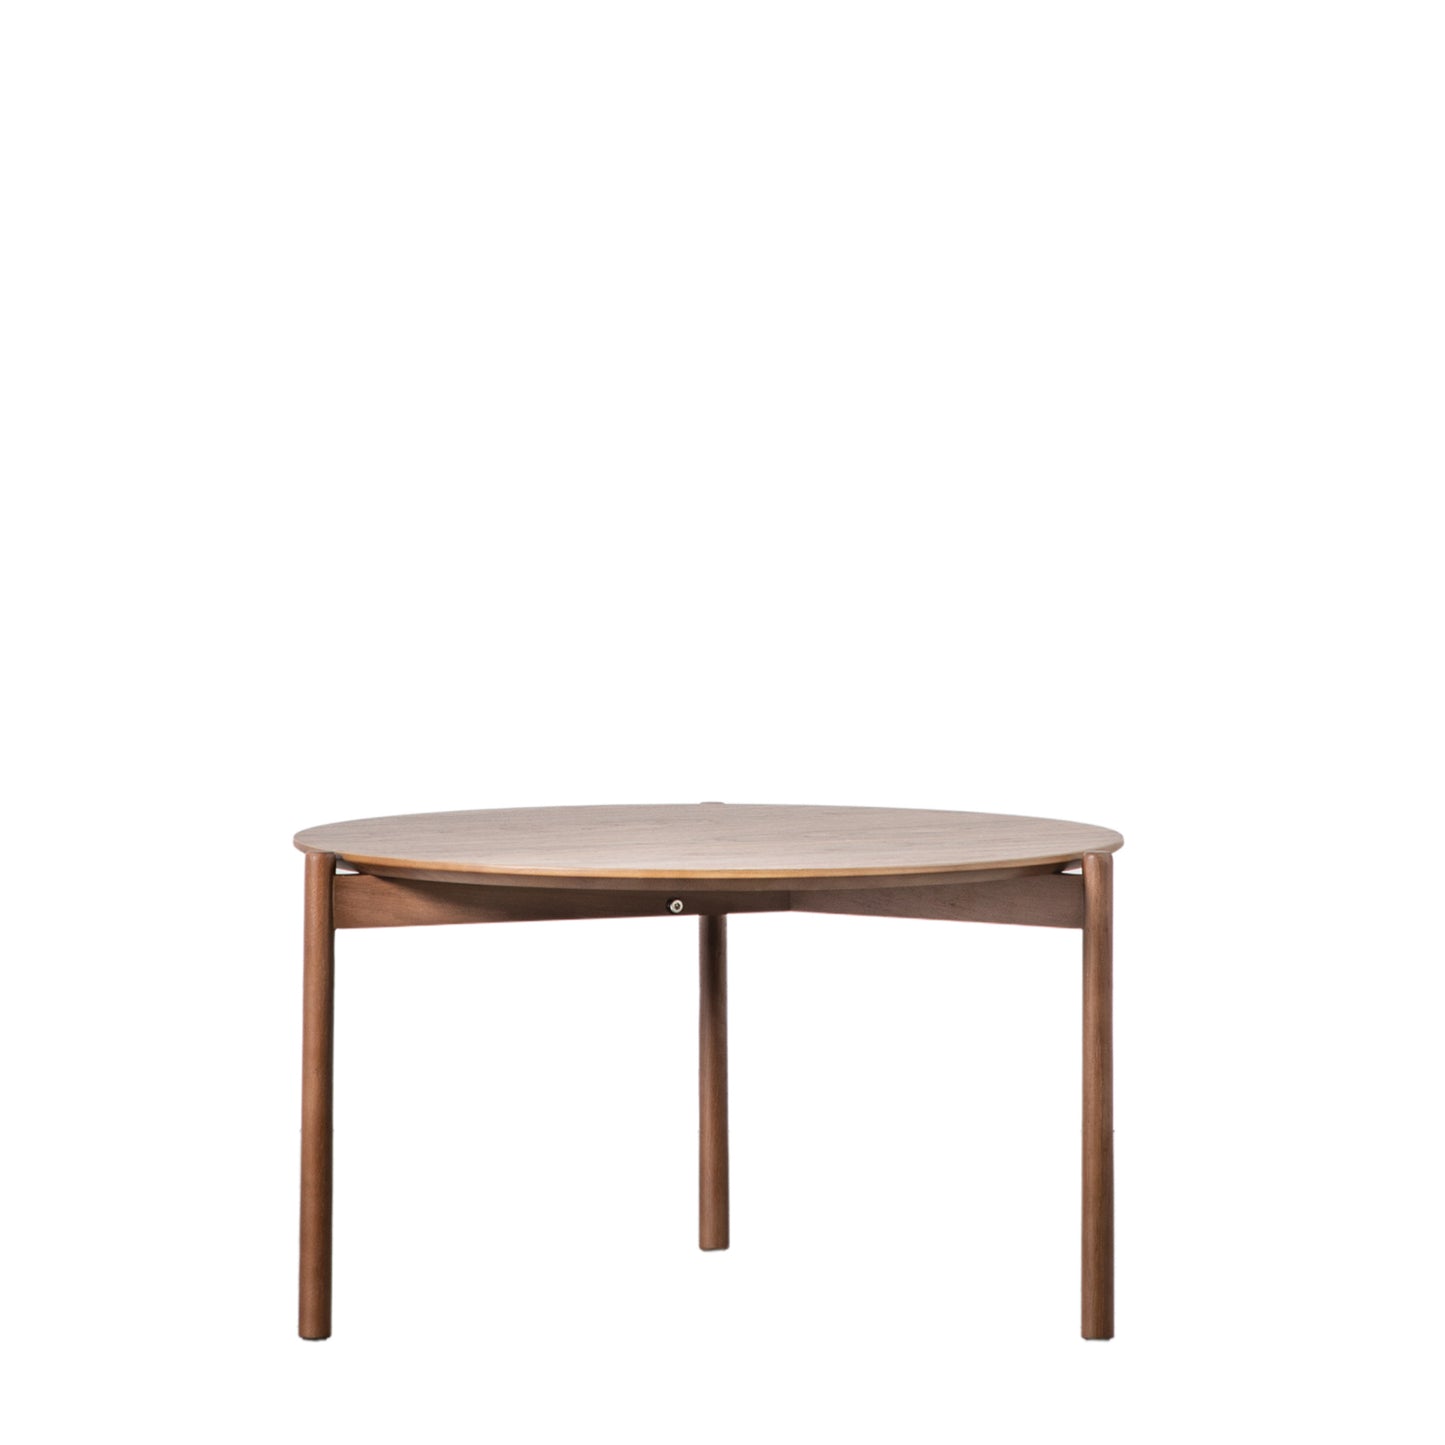 A round Allington Coffee Table Walnut 700x700x400mm from Kikiathome.co.uk, featuring a wooden base and a glass top, perfect for enhancing interior decor.